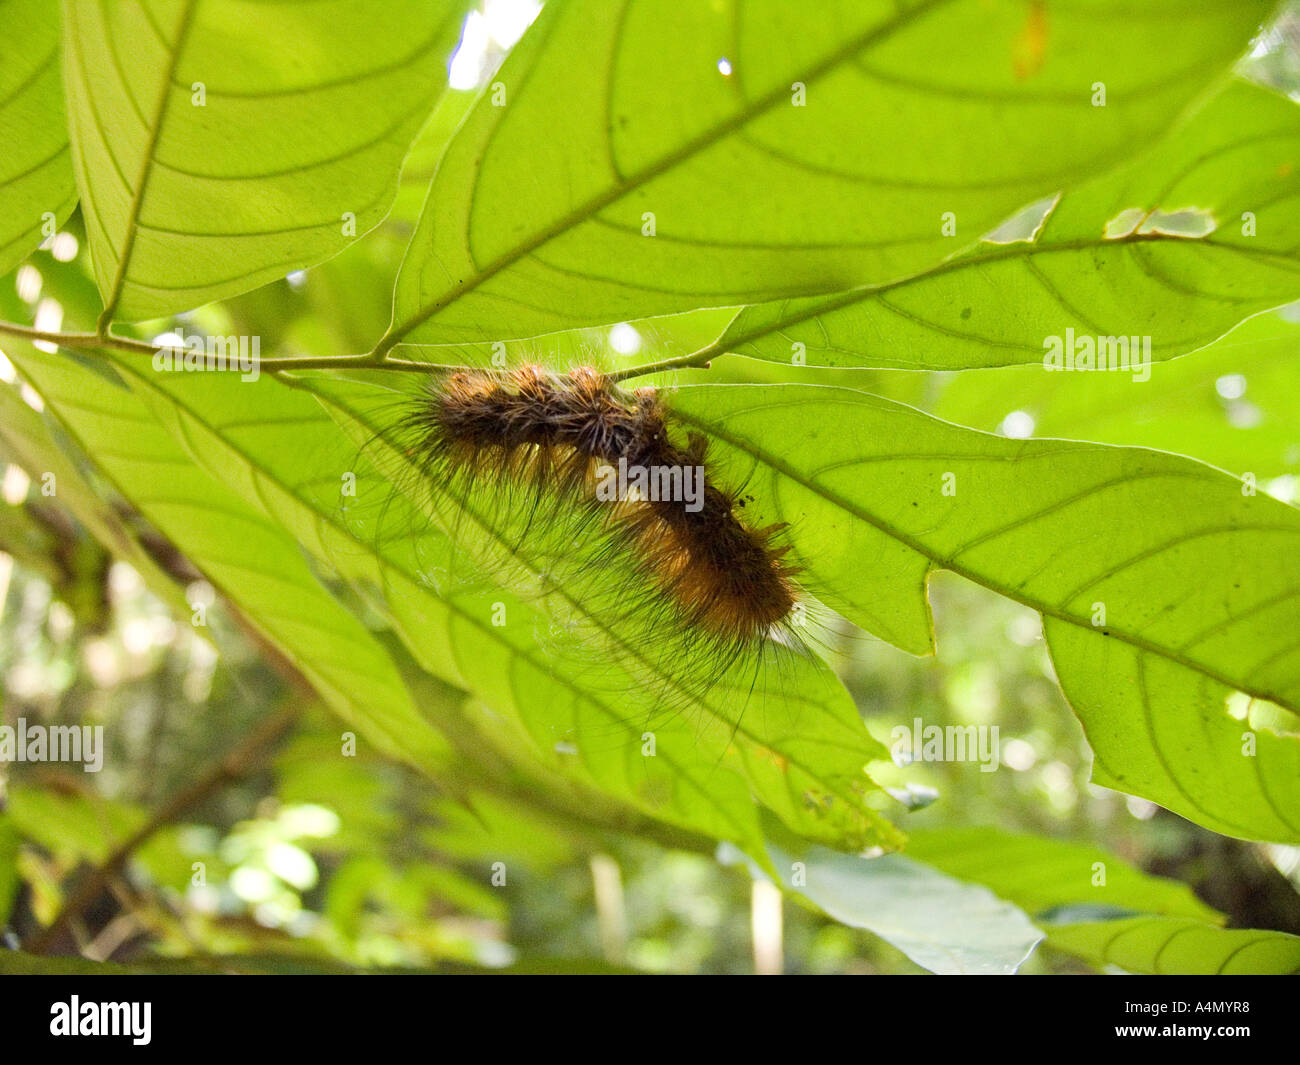 Malaysia Borneo Sabah Danum Valley fauna insects caterpillar with long defensive urticating hairs Stock Photo